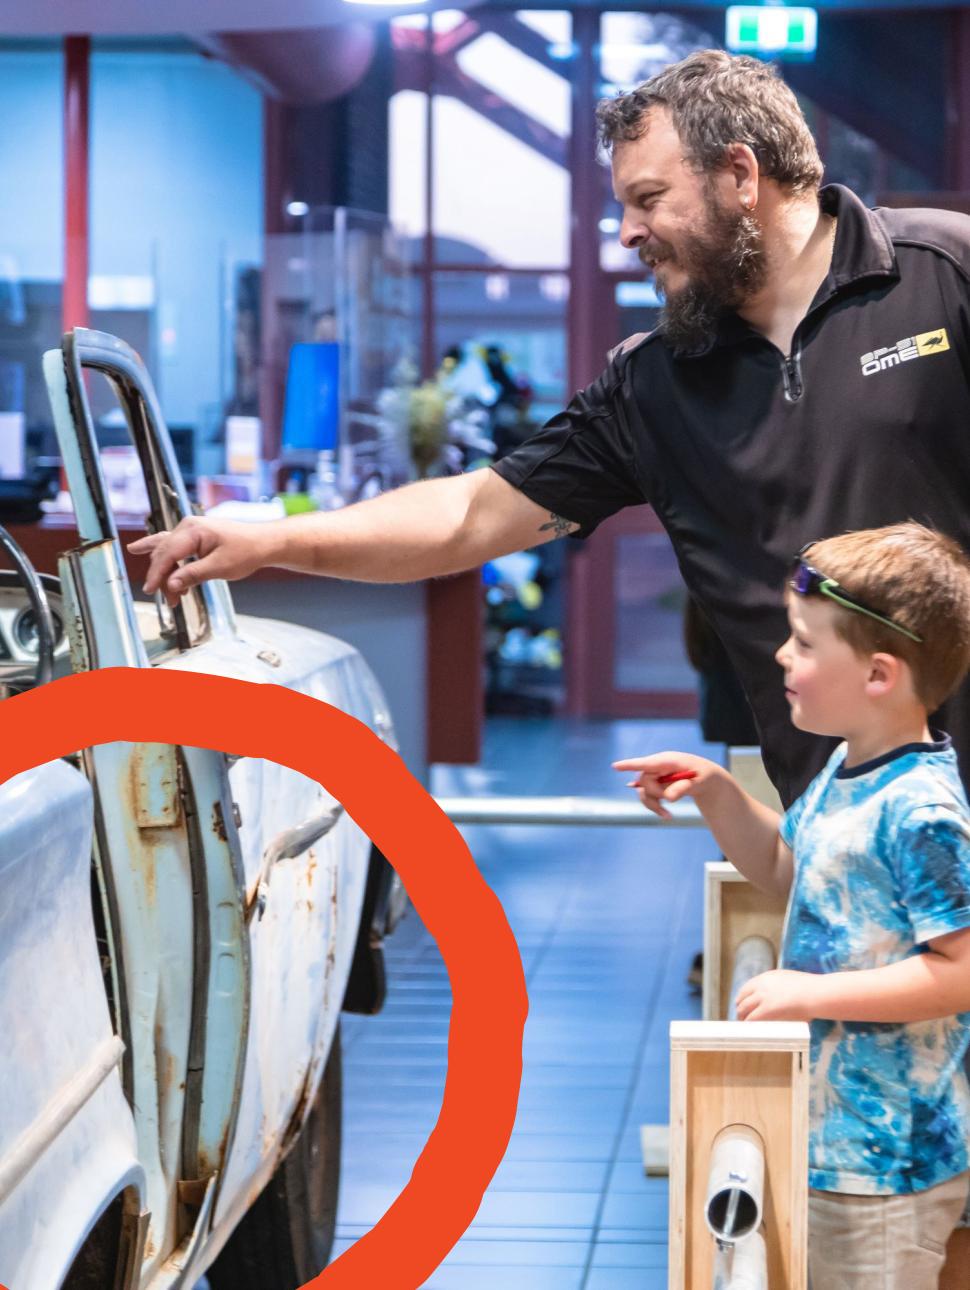 A father and his child look into a car on display, pointing and smiling